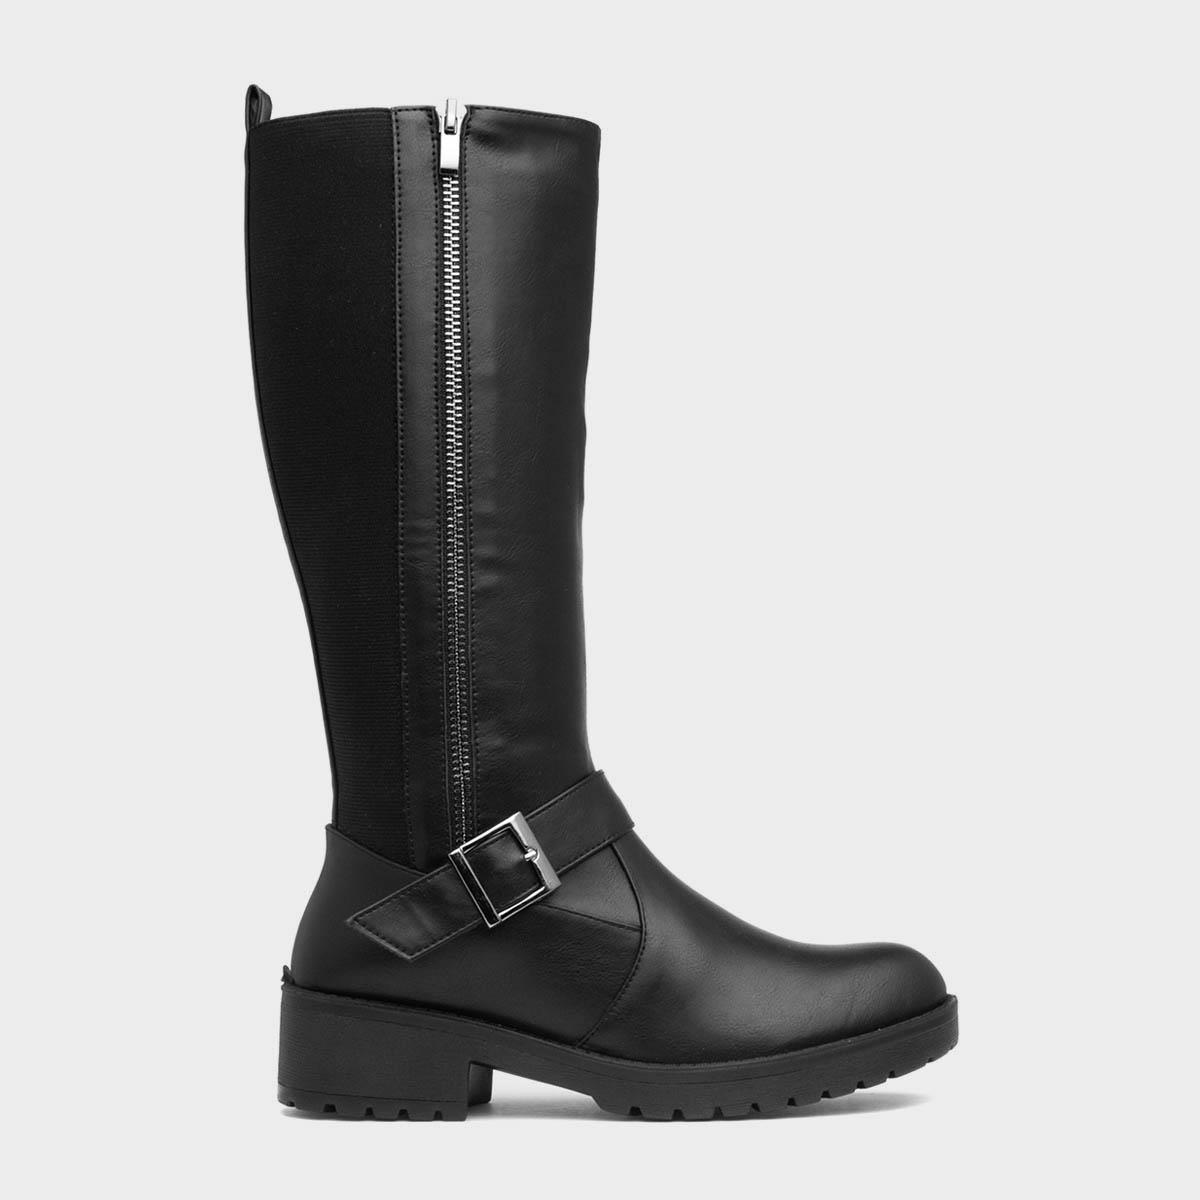 Lilley Milly Womens Black High Leg Boot-188076 | Shoe Zone